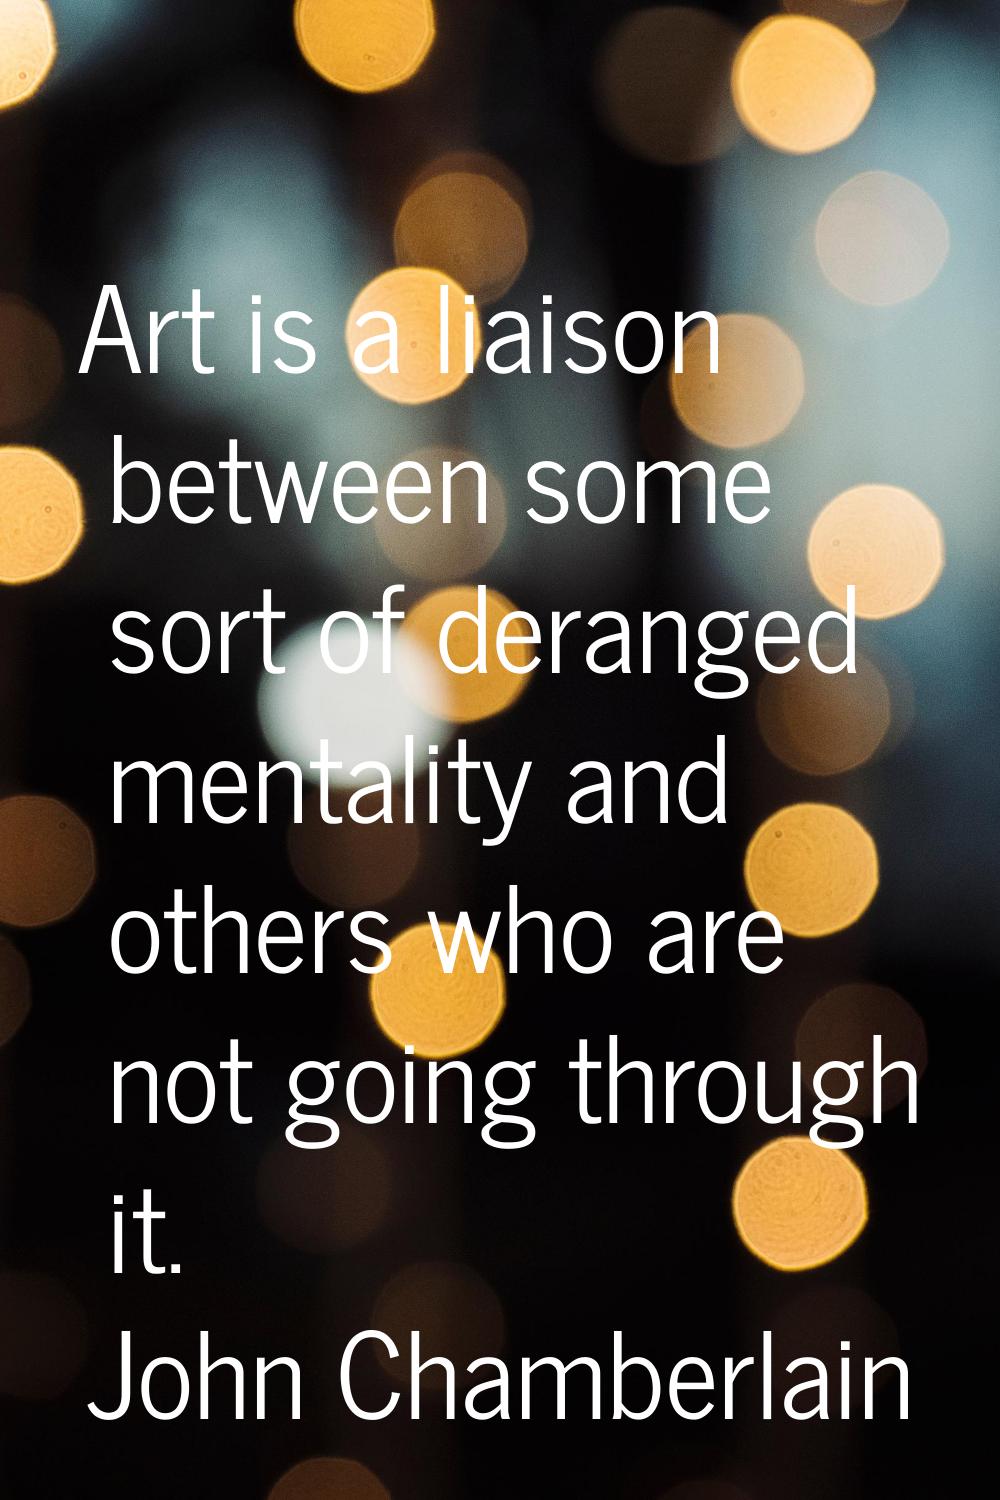 Art is a liaison between some sort of deranged mentality and others who are not going through it.